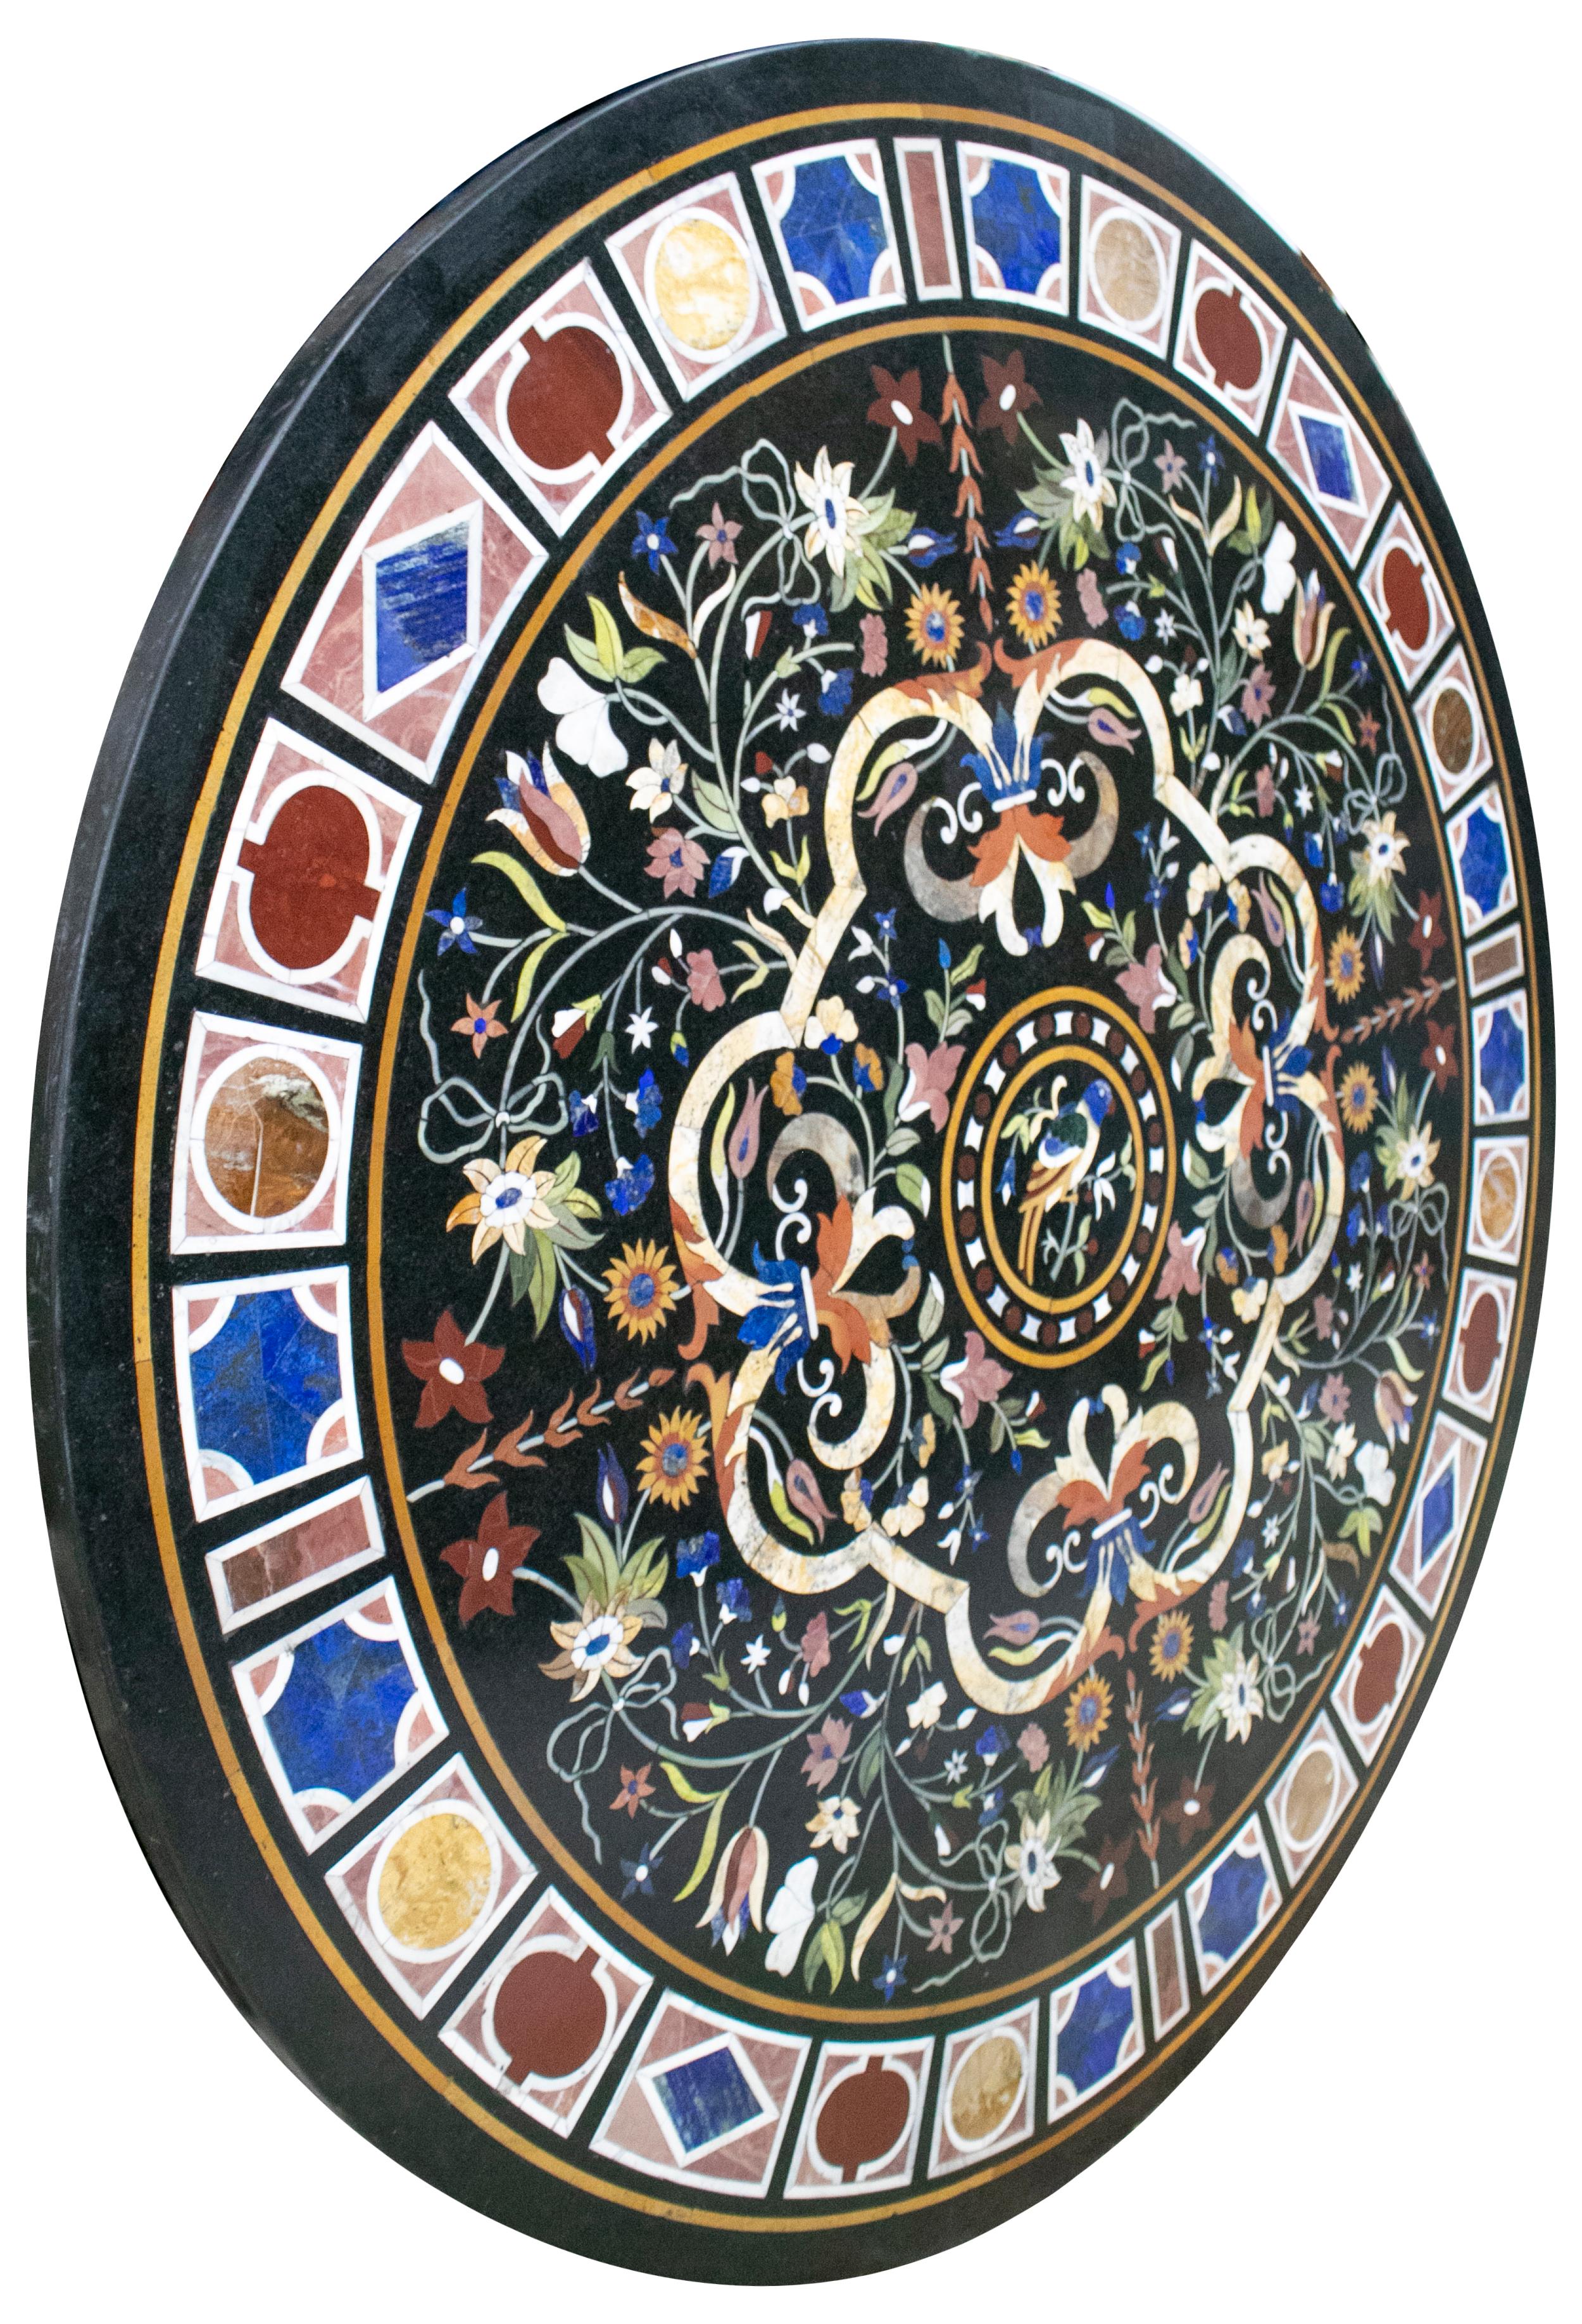 Classical Italian Pietra Dura stone black marble table top decorated with a bird surrounded by flower decoration and a geometric frame. Handcrafted mosaic inlay using blue lapis lazuli and an assortment of semiprecious stones and marbles.